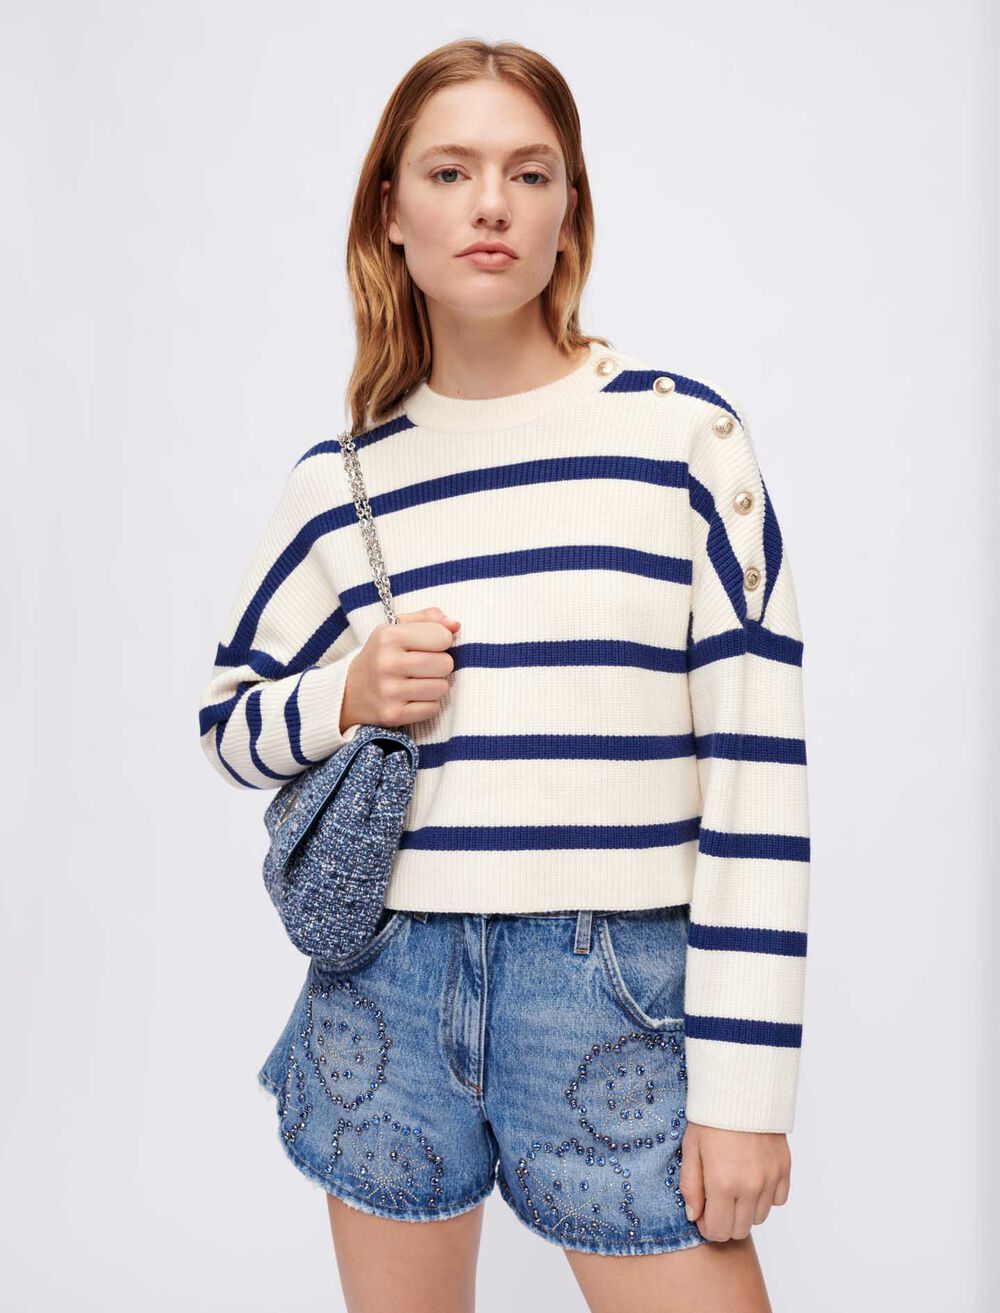 White and blue striped sweater